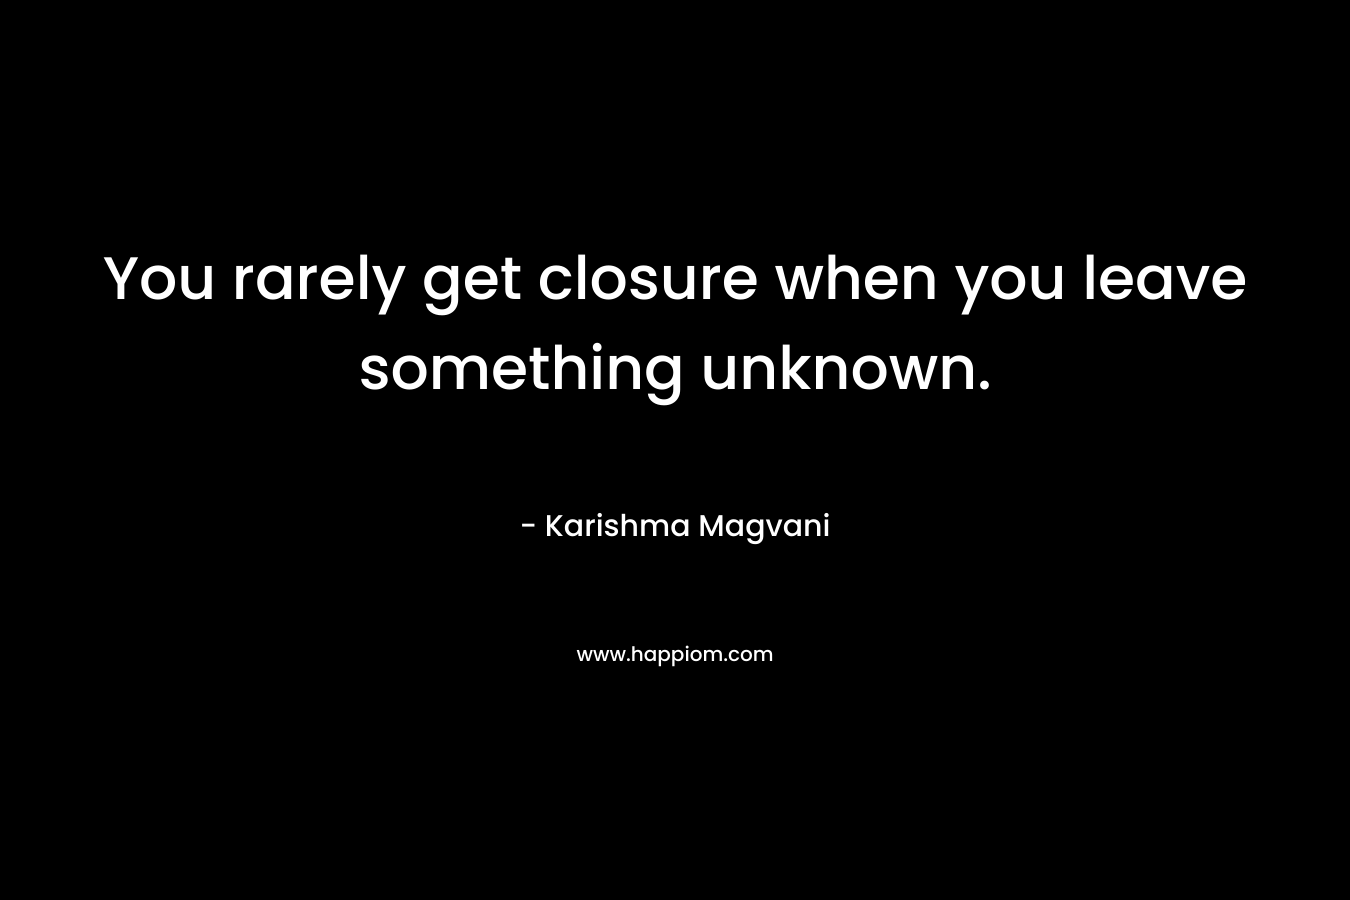 You rarely get closure when you leave something unknown. – Karishma Magvani